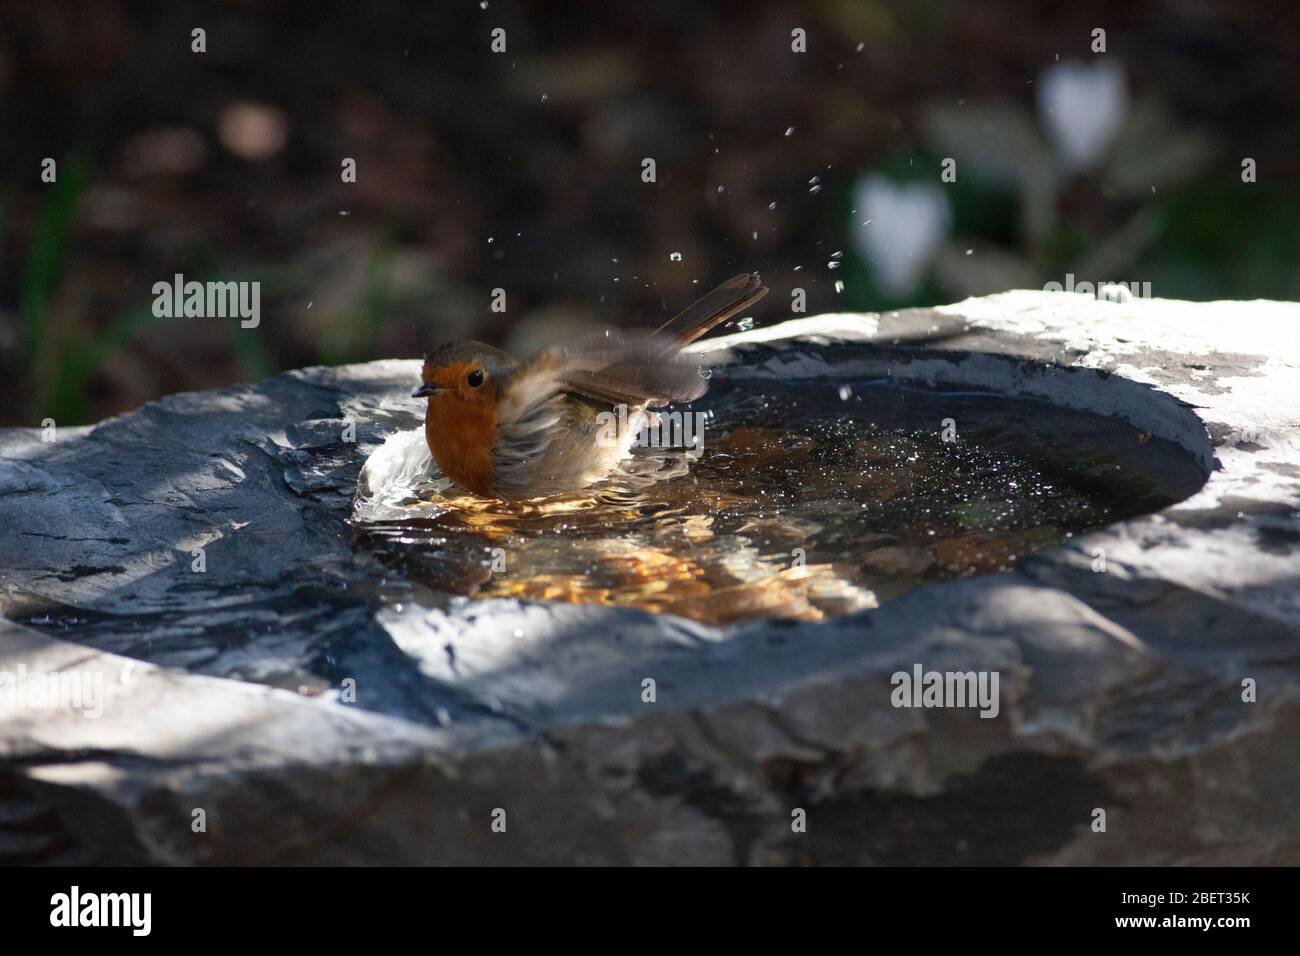 London, UK. 15th Apr, 2020. a robin enjoys the sunshine as it splashes in the water of a slate birdbath in a garden in Clapham, south London. Credit: Anna Watson/Alamy Live News Stock Photo